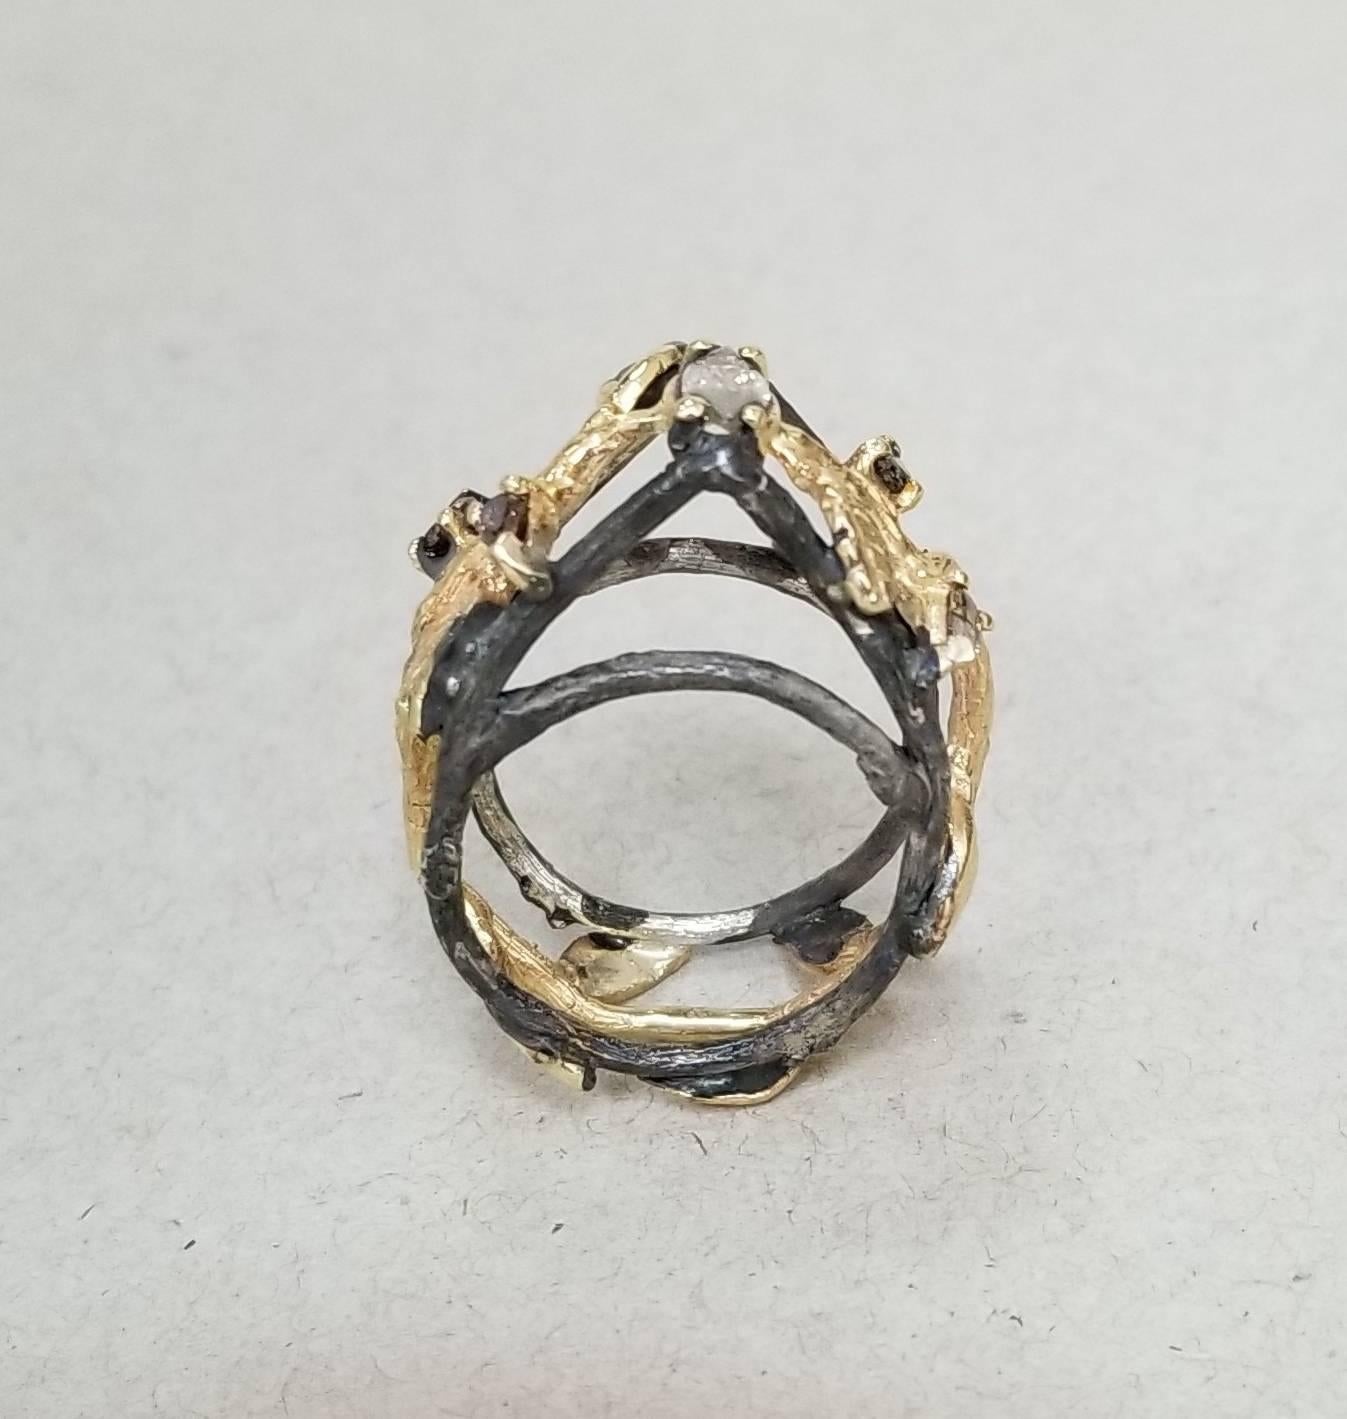 14k yellow gold and silver Gresha signature bark and leaf ring with 1 natural brown marquise cut diamond weighing .32 and 4 natural brown pear shape cut diamonds weighing .49pts. set in a 14k yellow gold bark and leaf inlaid in silver that has been